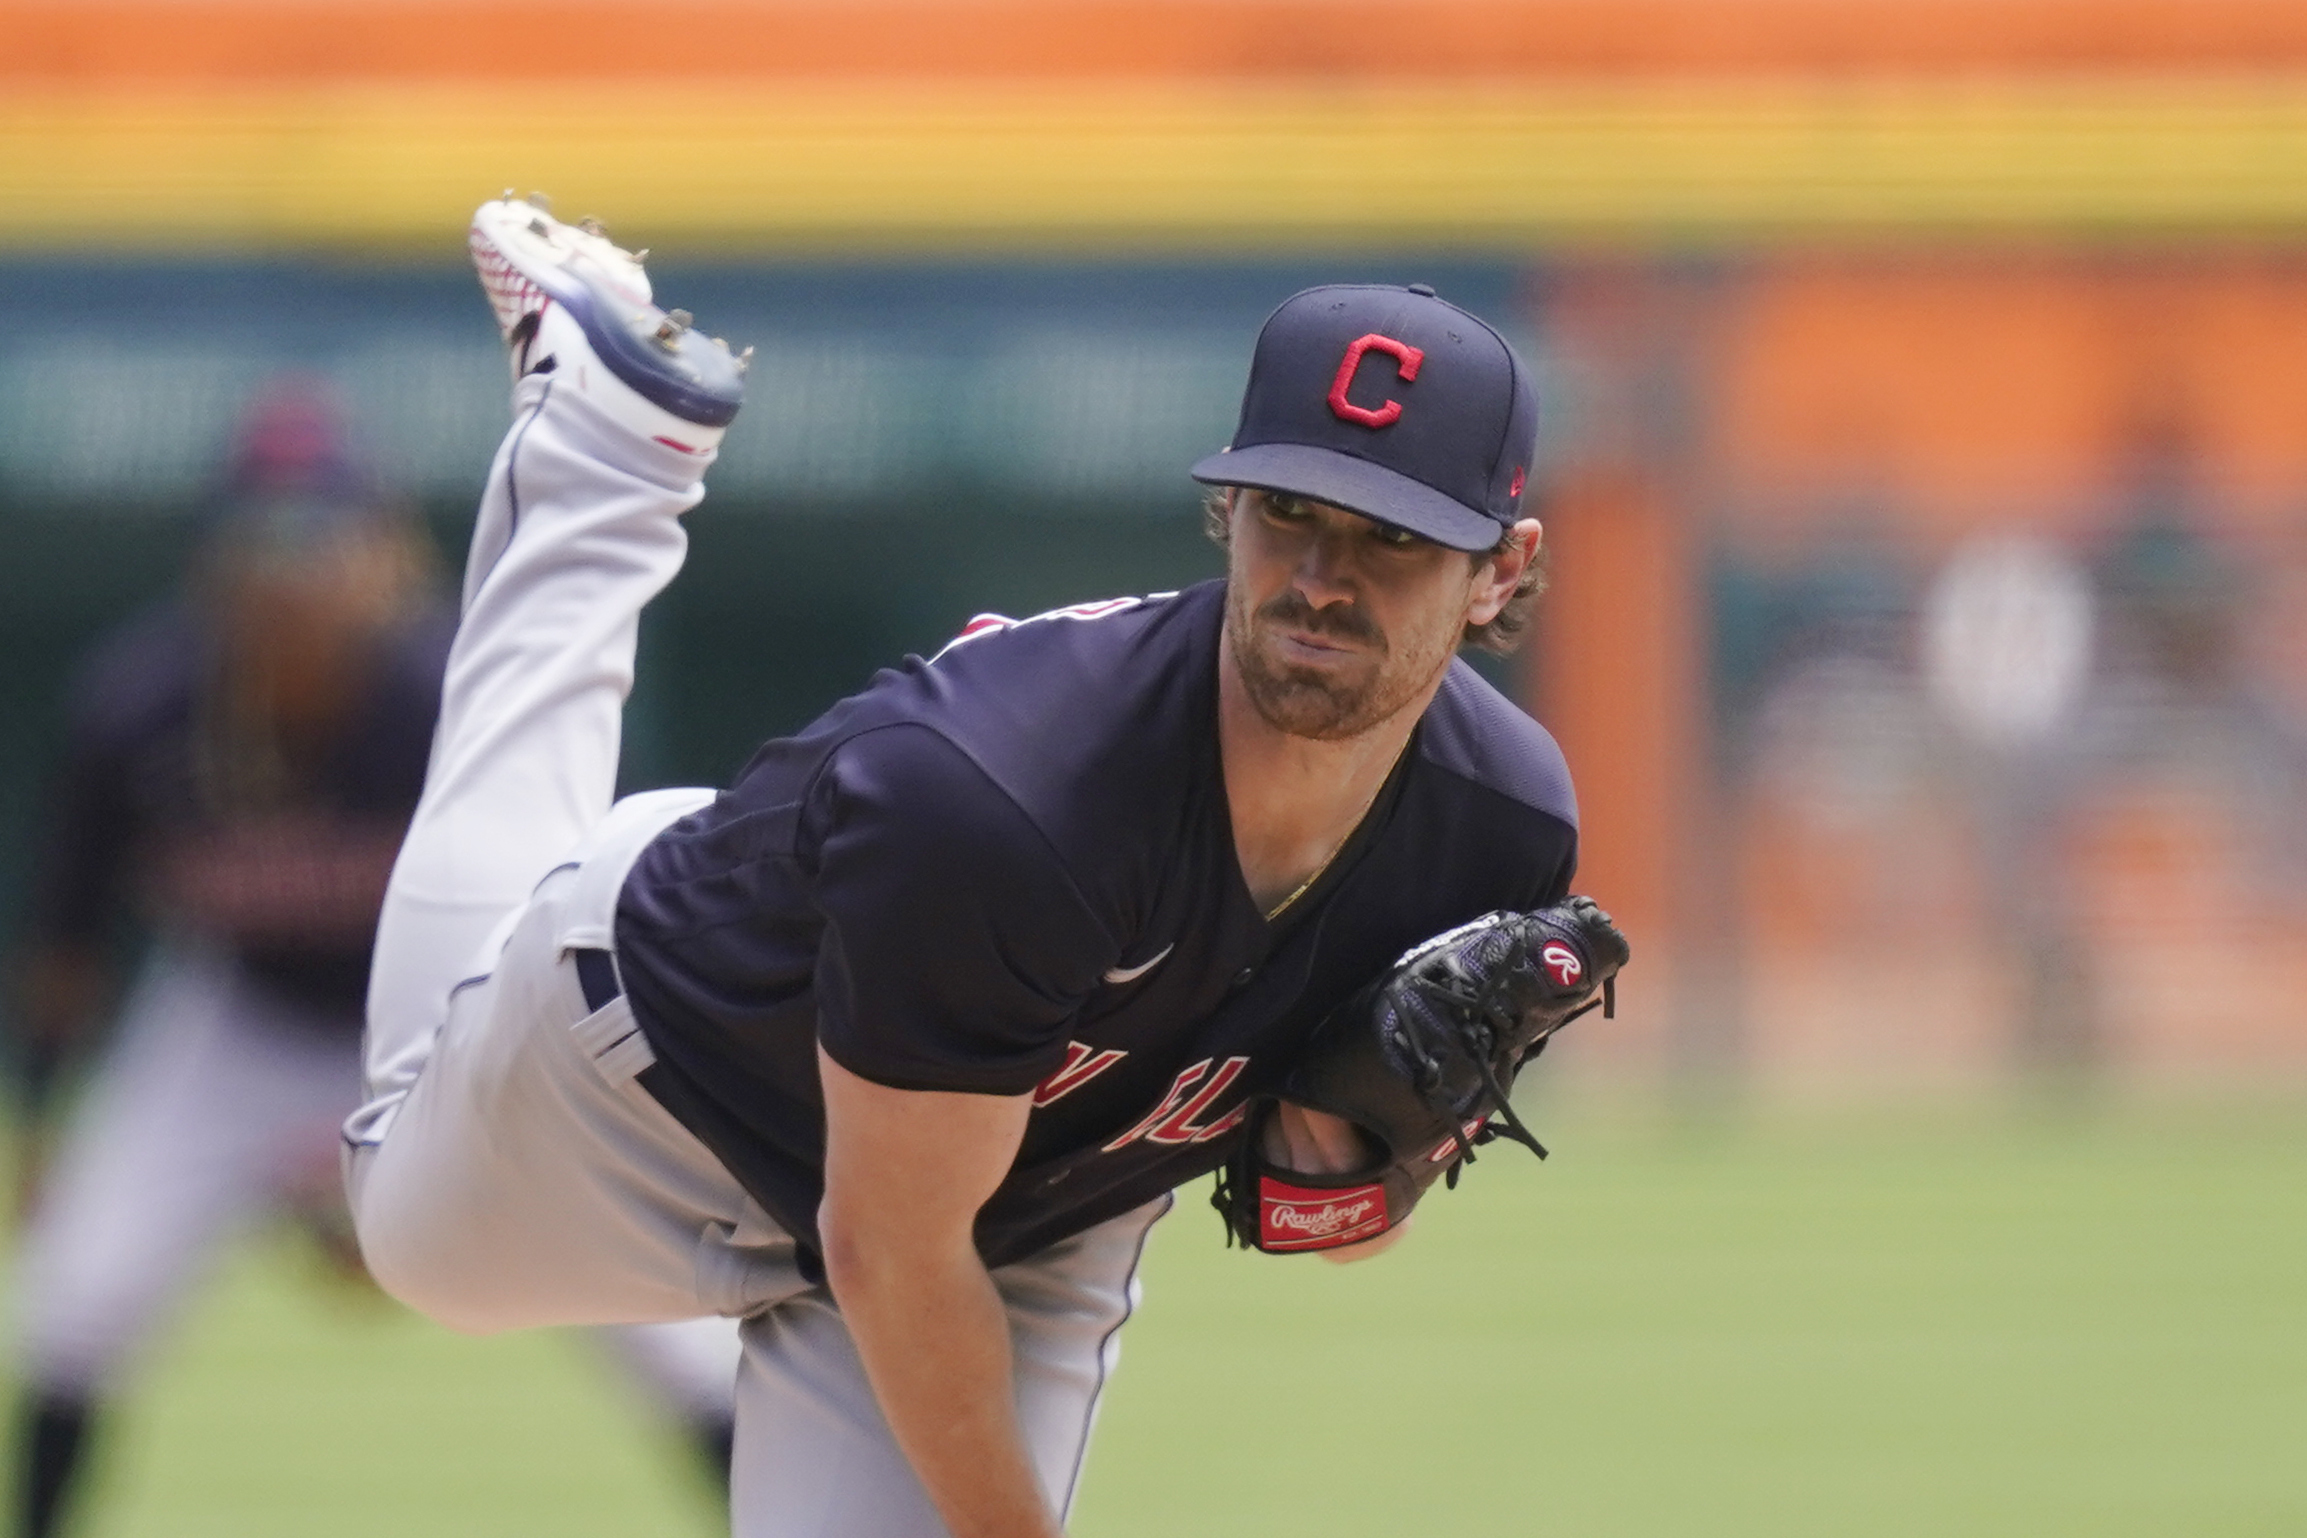 The Washington Nationals Give Shane Bieber Trouble In Cleveland